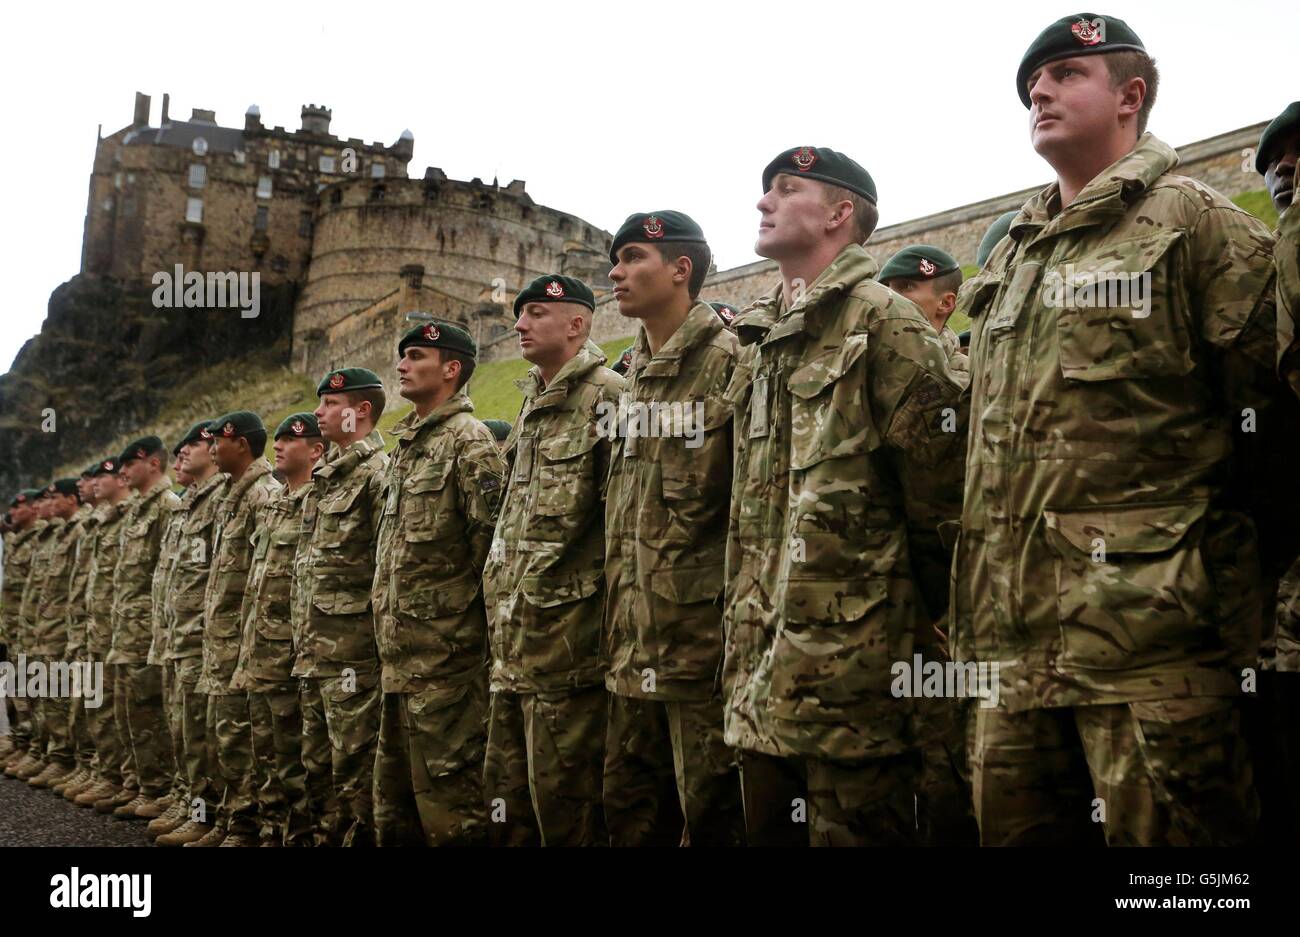 Soldiers from the 3rd Battalion The Rifles(3 Rifles) become the first English battalion to be granted the freedom of the city of Edinburgh as they prepare to parade down the Royal Mile, with Edinburgh Castle in the background. Stock Photo